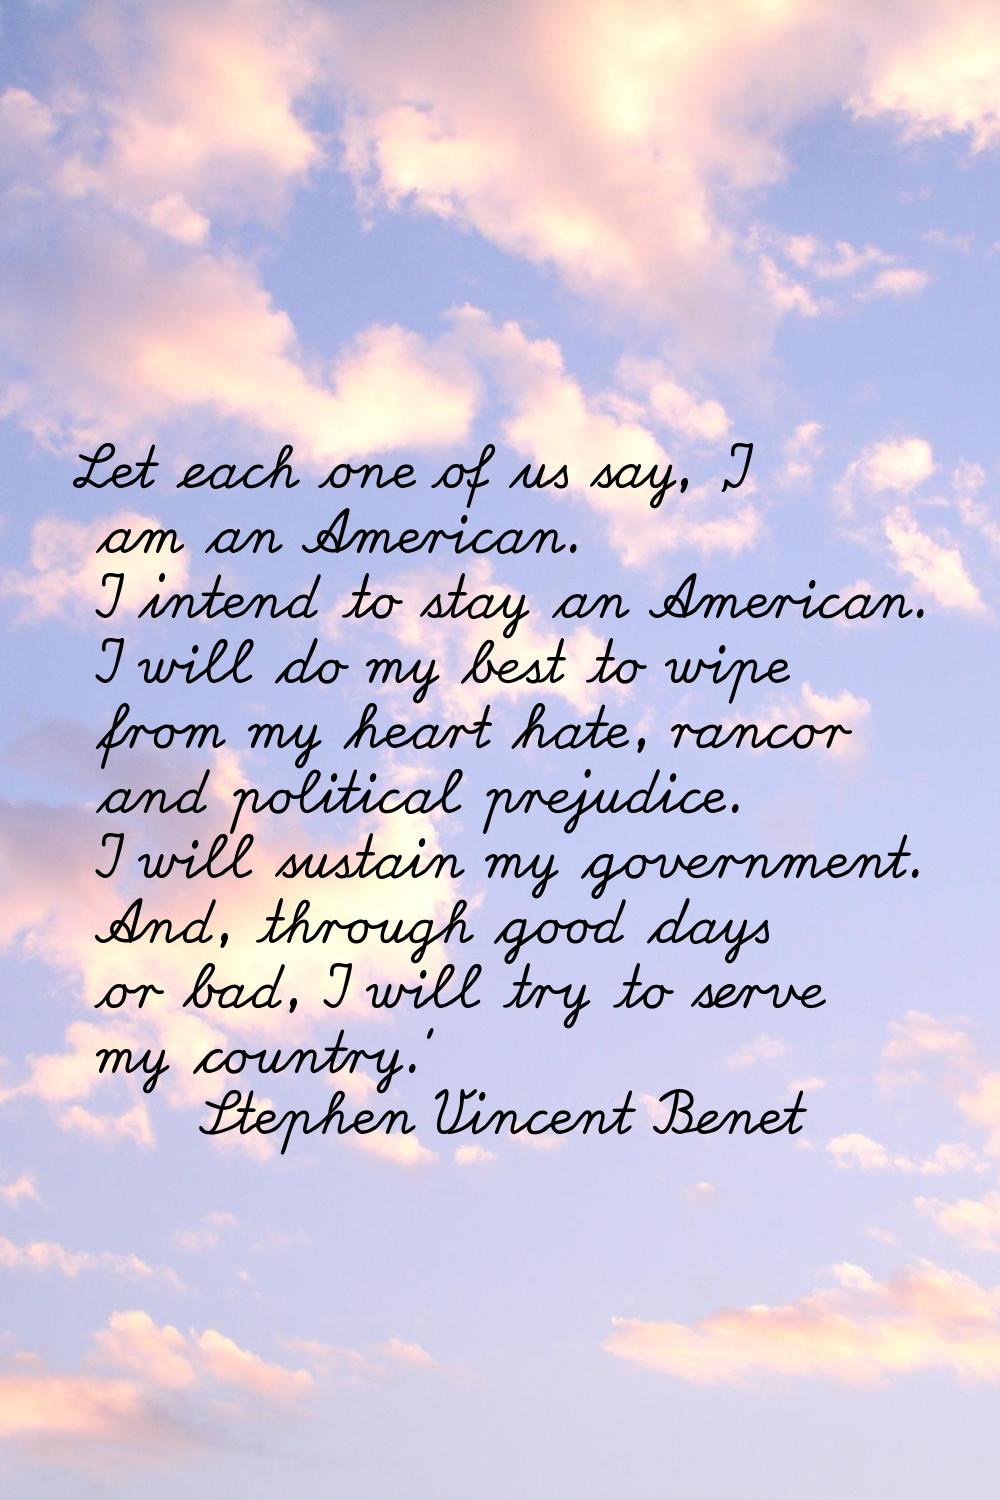 Let each one of us say, 'I am an American. I intend to stay an American. I will do my best to wipe 